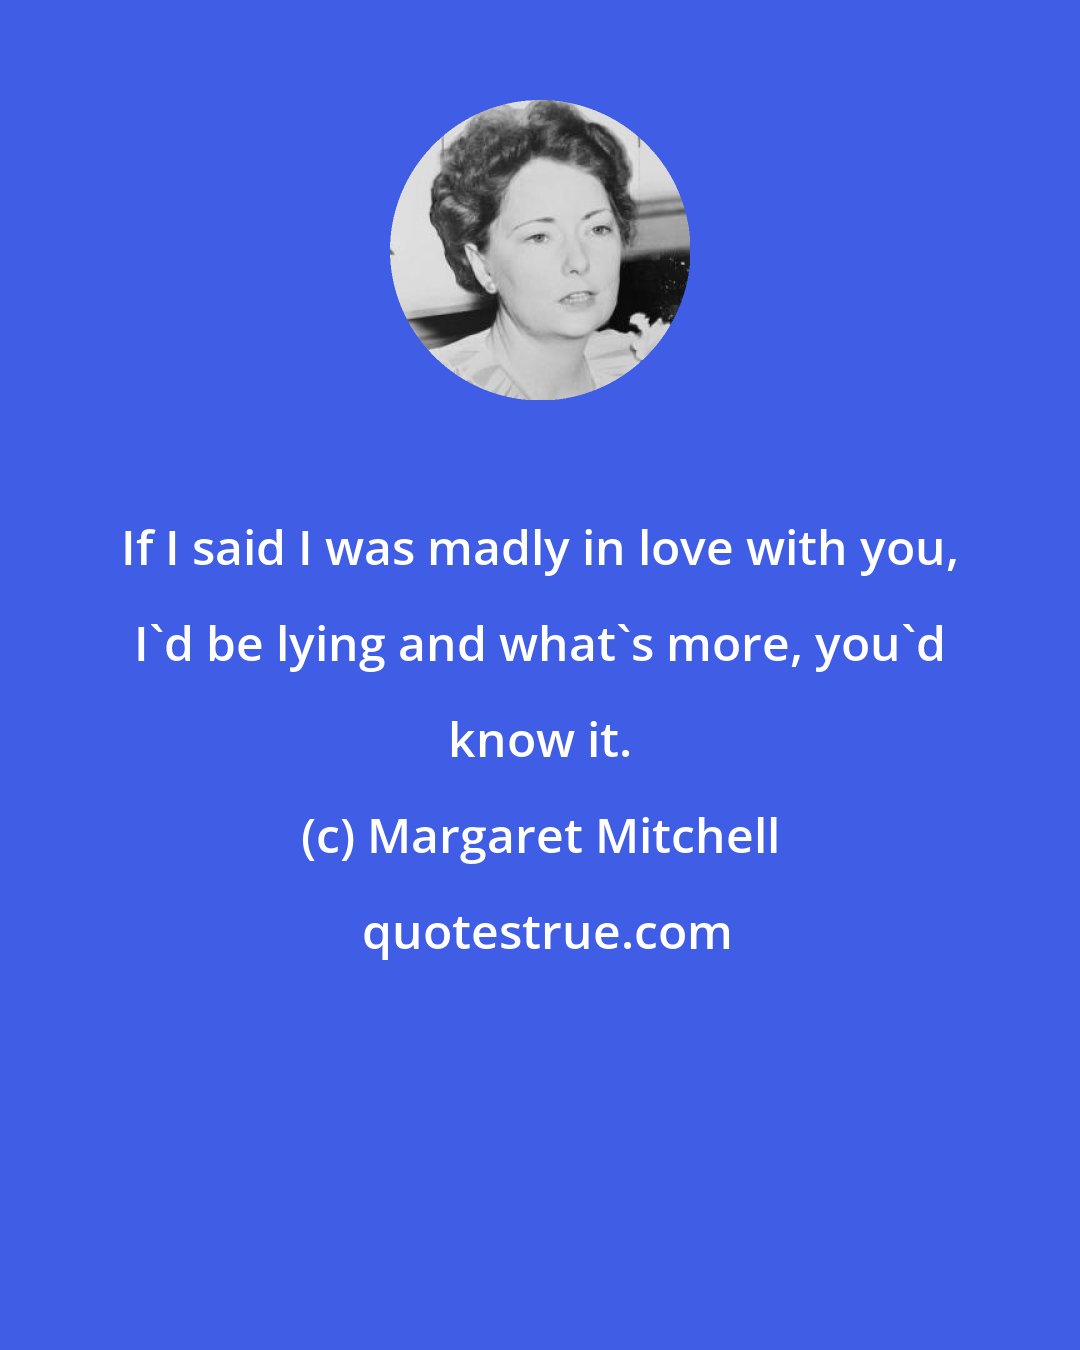 Margaret Mitchell: If I said I was madly in love with you, I'd be lying and what's more, you'd know it.